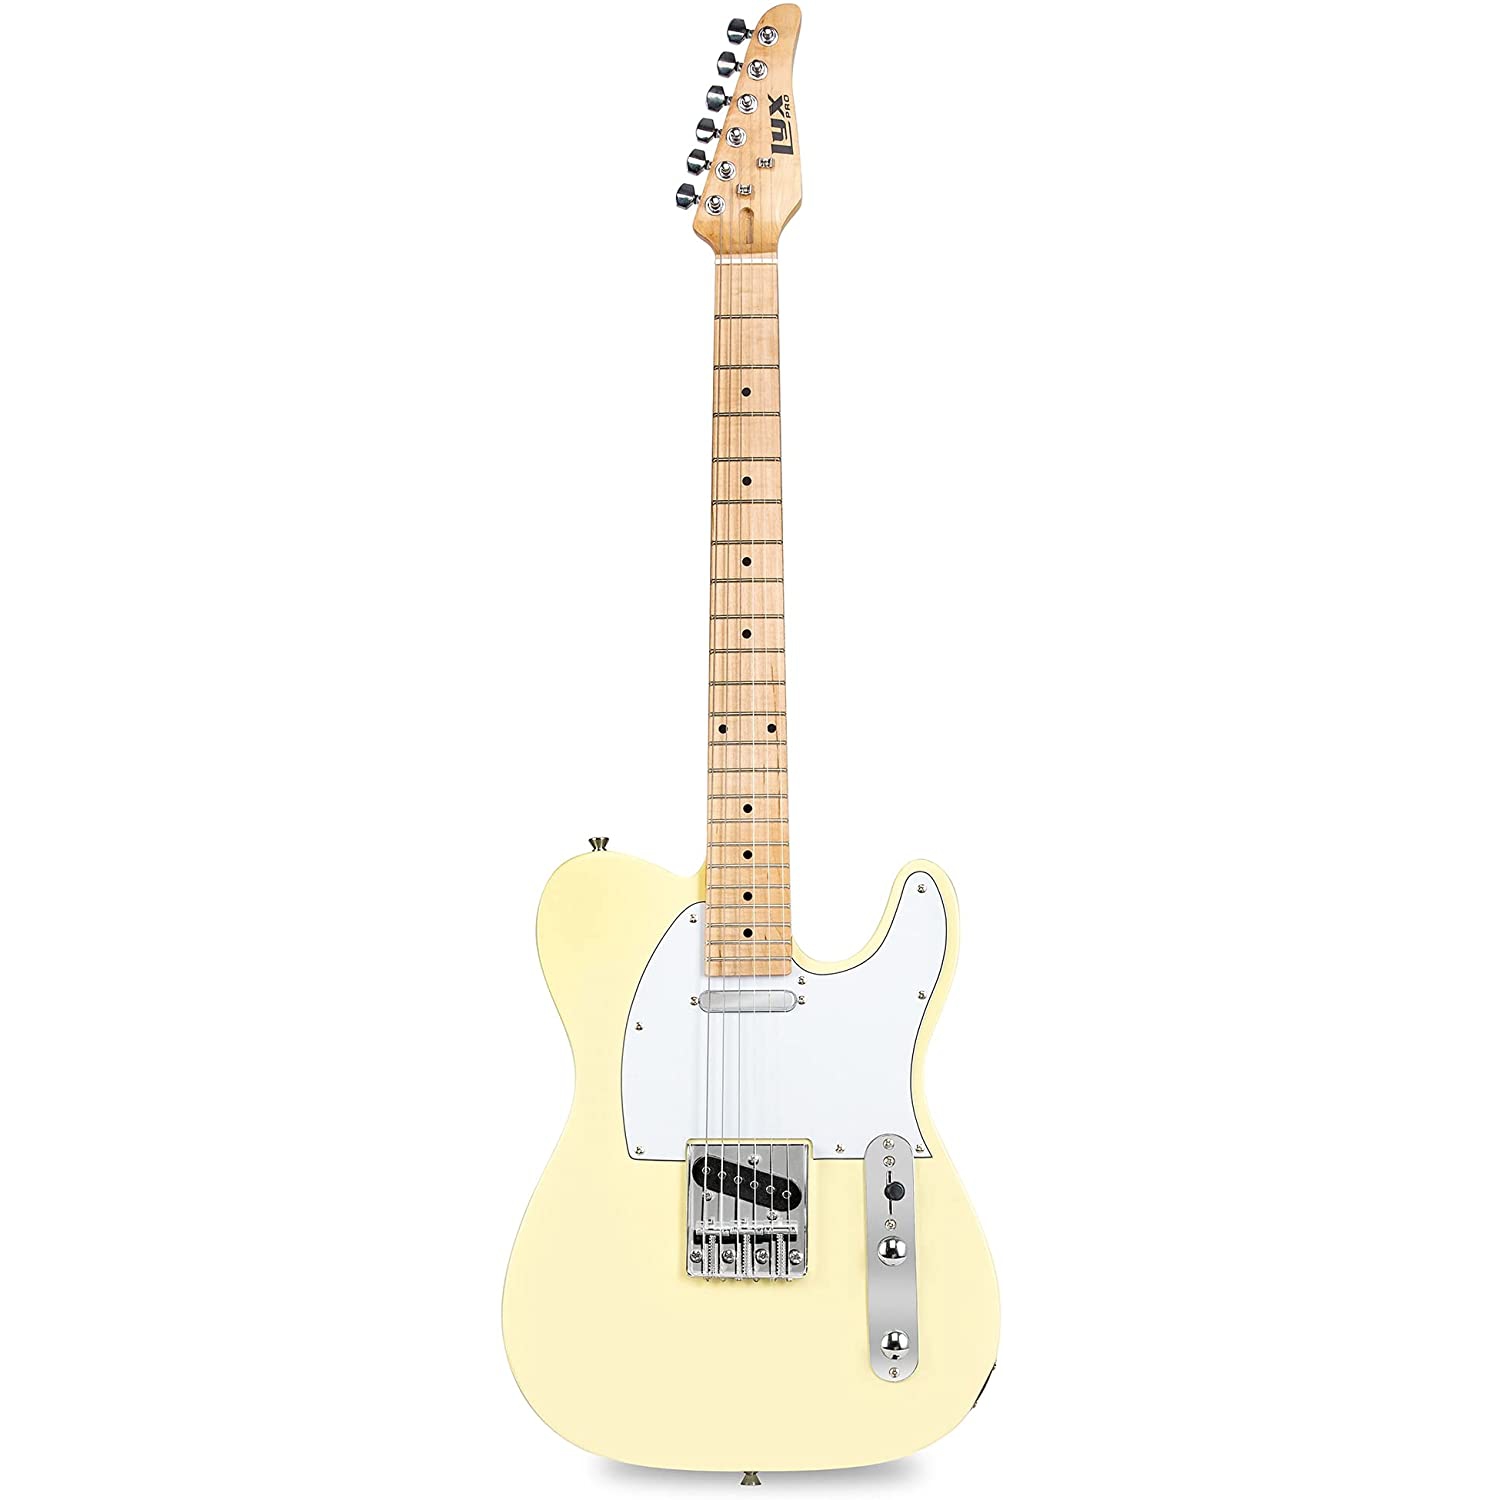 LyxPro 39” Electric Guitar | Solid Full-Size Paulownia Wood Body, 3-Ply Pickguard, C-Shape Neck, Ashtray Bridge, Quality Gear Tuners, 3-Way Switch & Volume/Tone Controls | 2 Picks Included